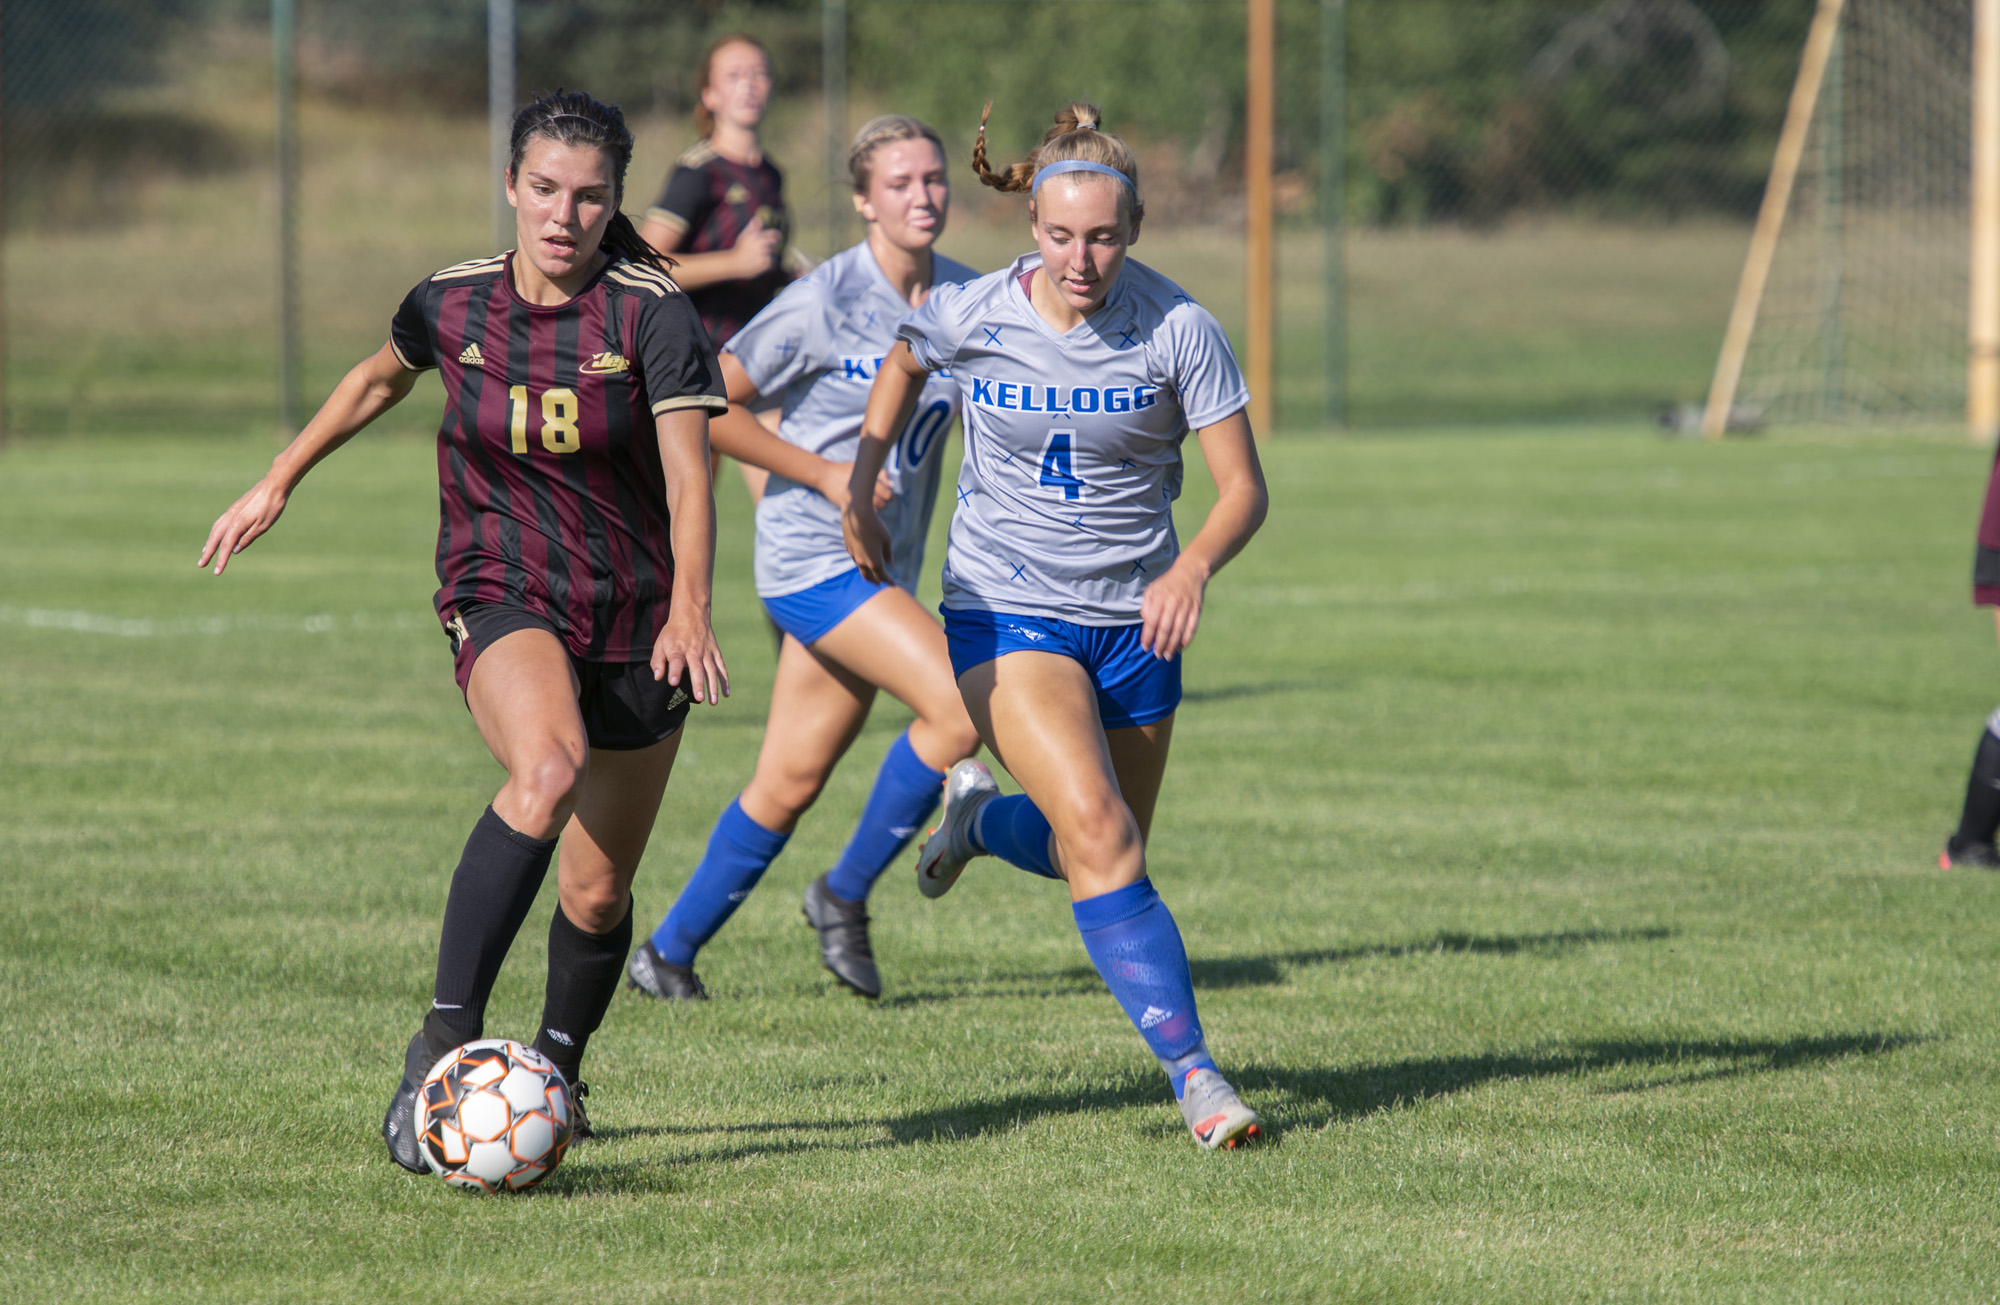 The women's soccer team competes during a home game.